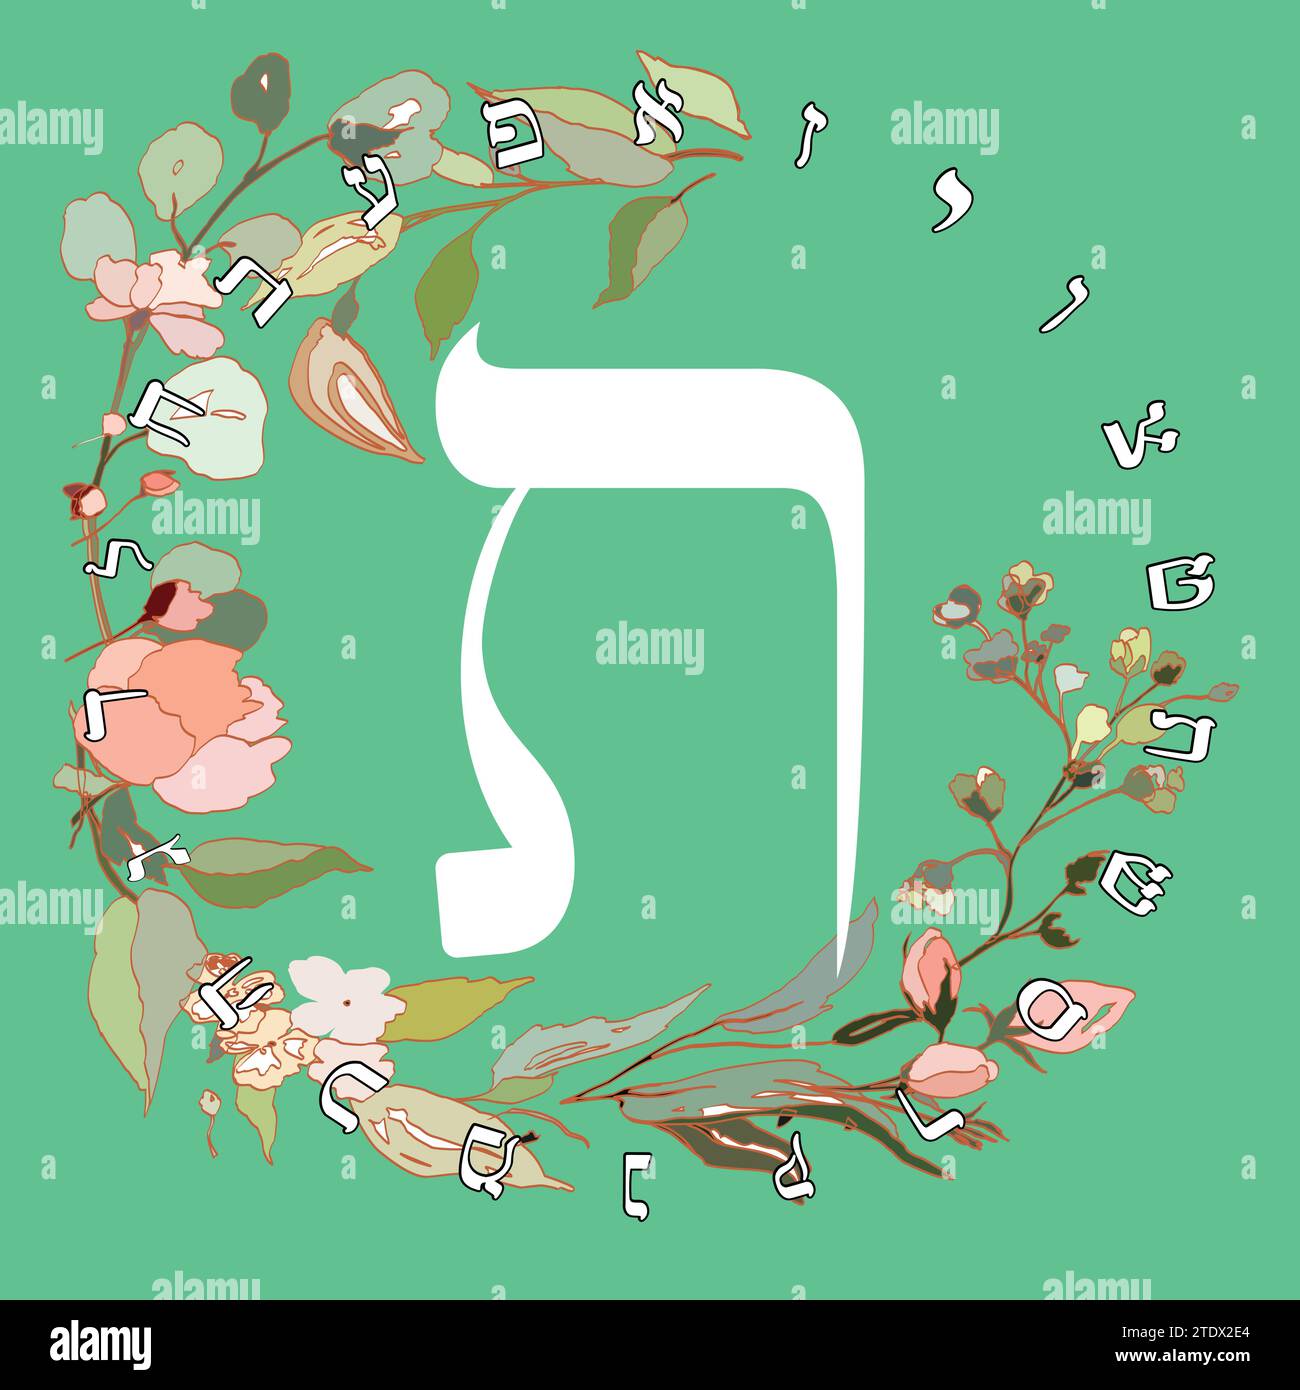 Vector illustration of the Hebrew alphabet with floral design. Hebrew letter called Tau white on green background. Stock Vector